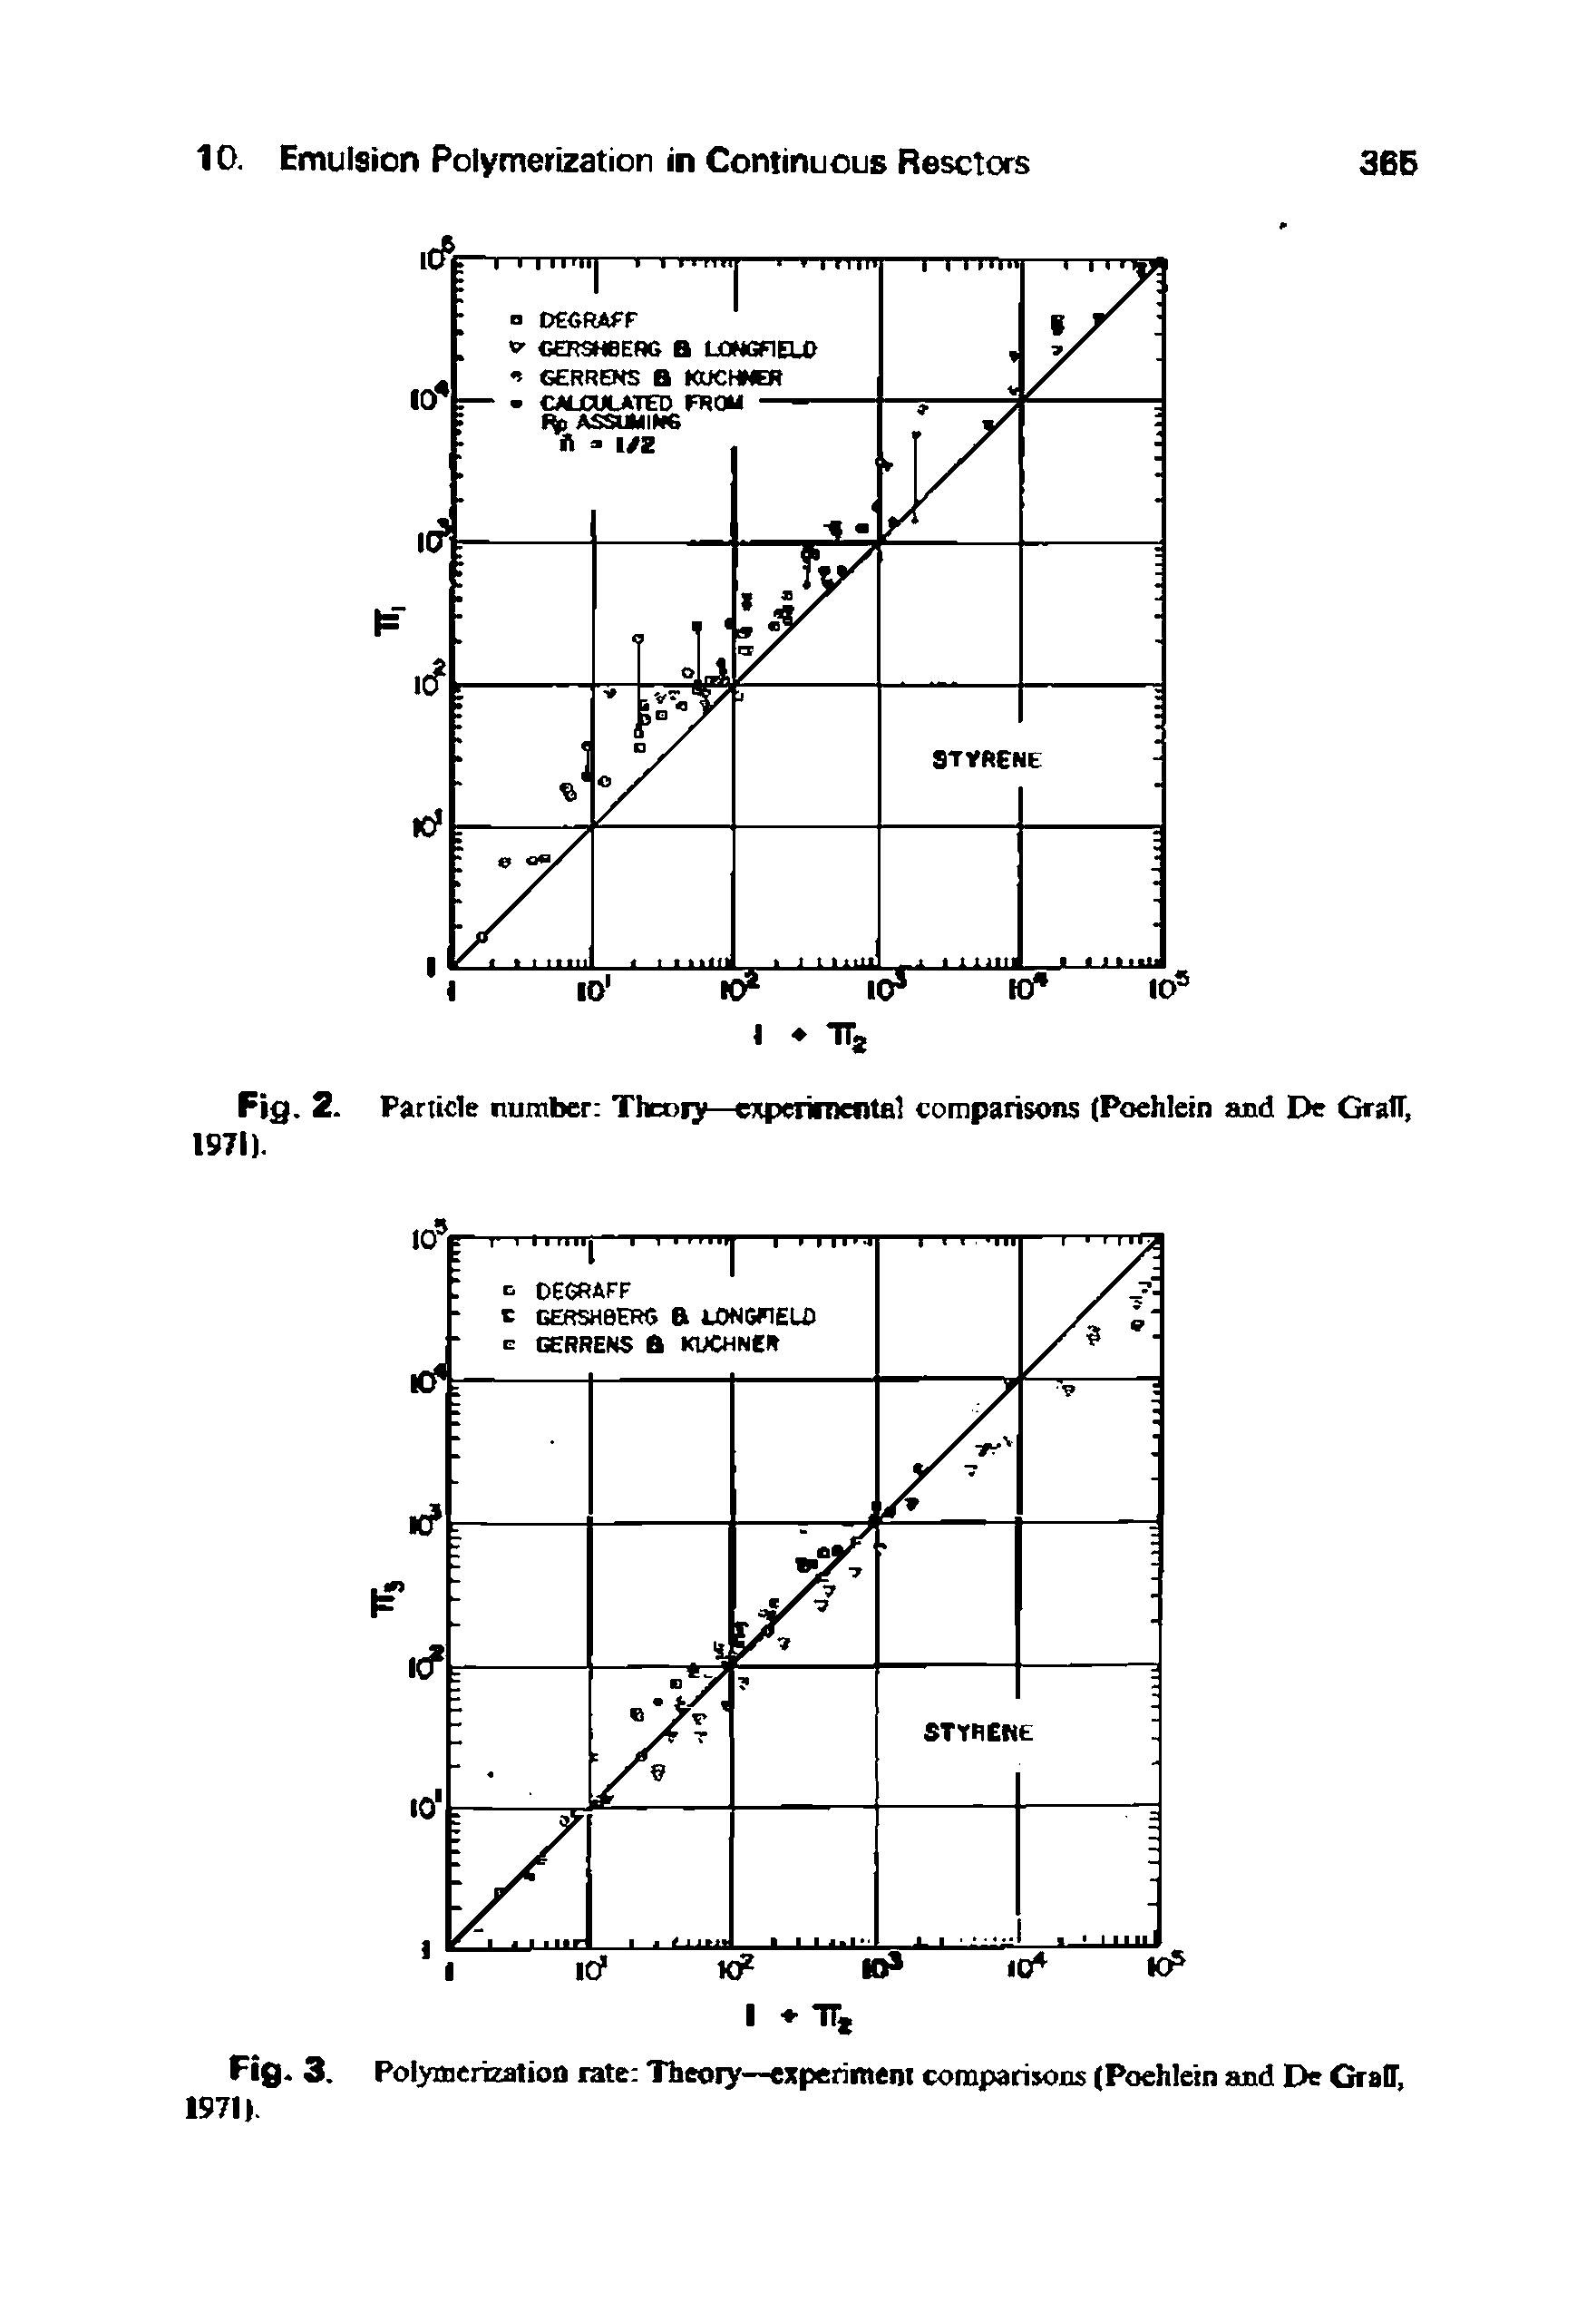 Fig. 3. Polymerization rate Theory—experimeni comparisons (Poehlein and De Graff, 1971)...